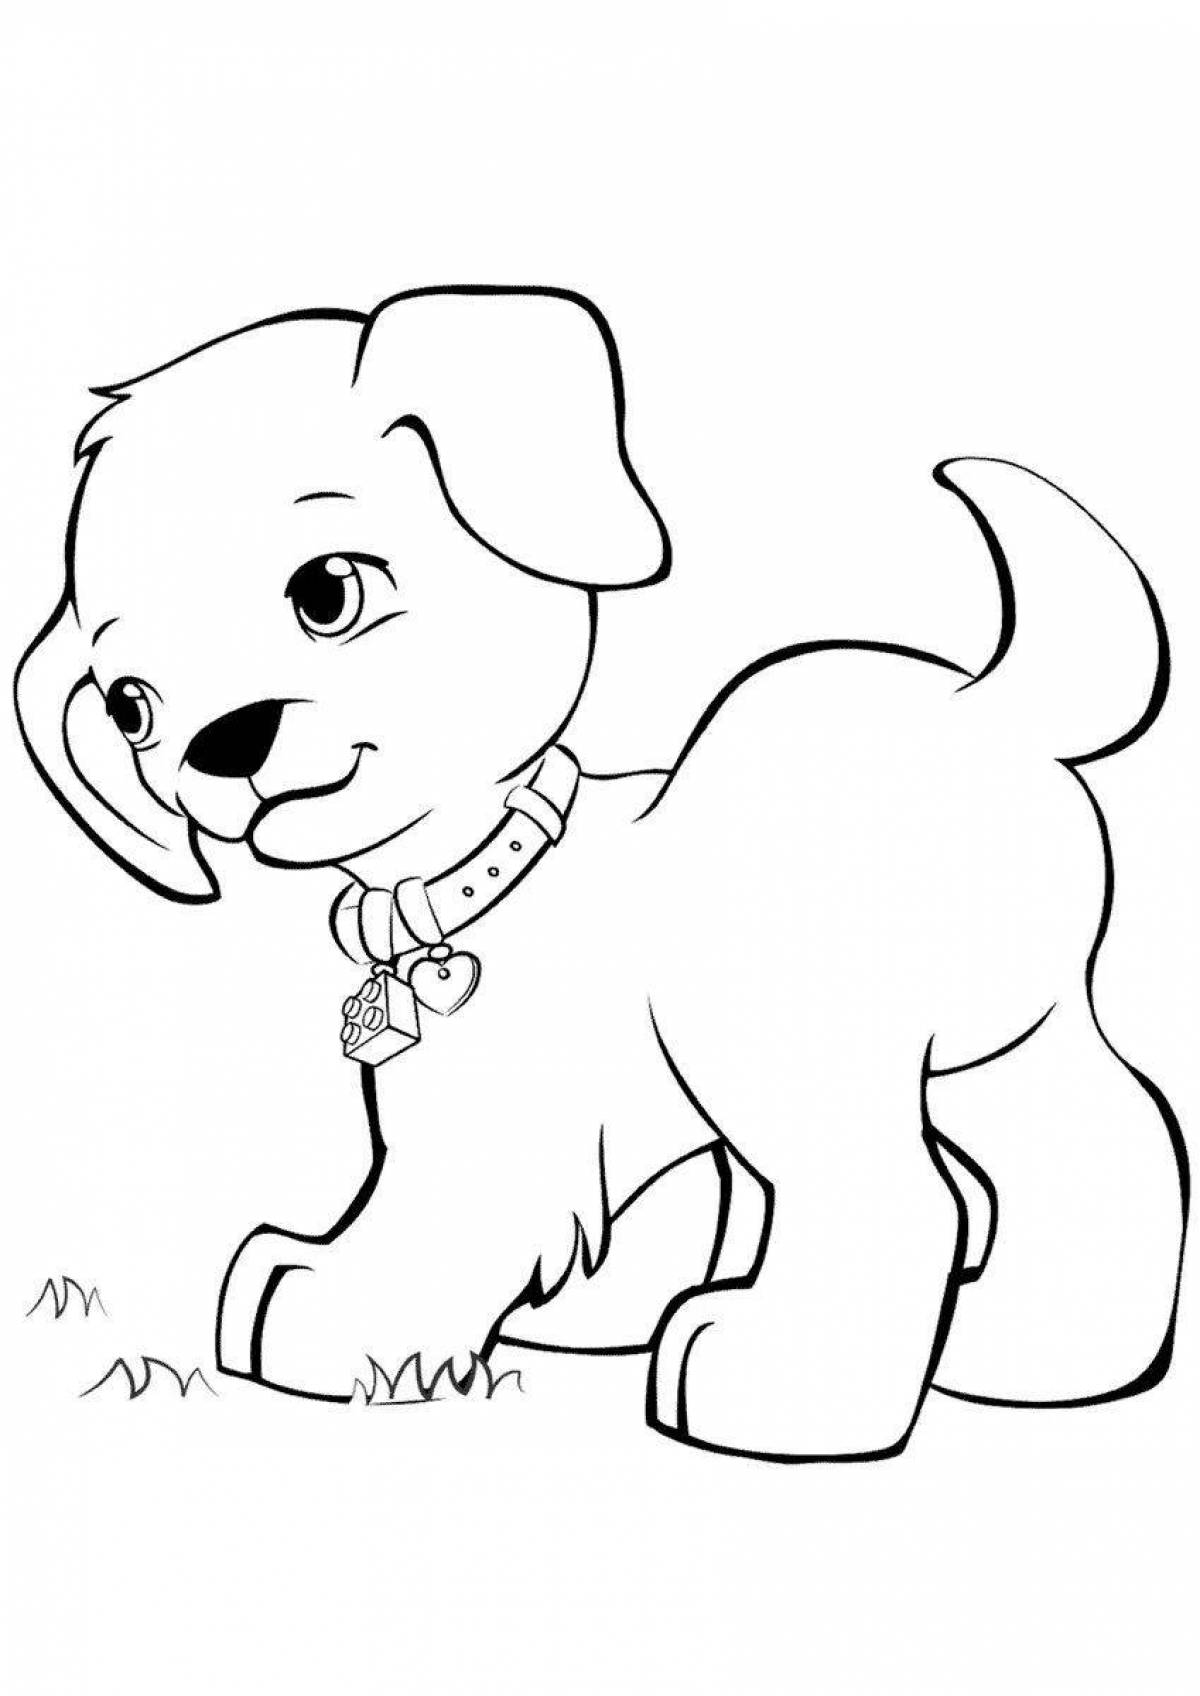 Blessed child coloring page